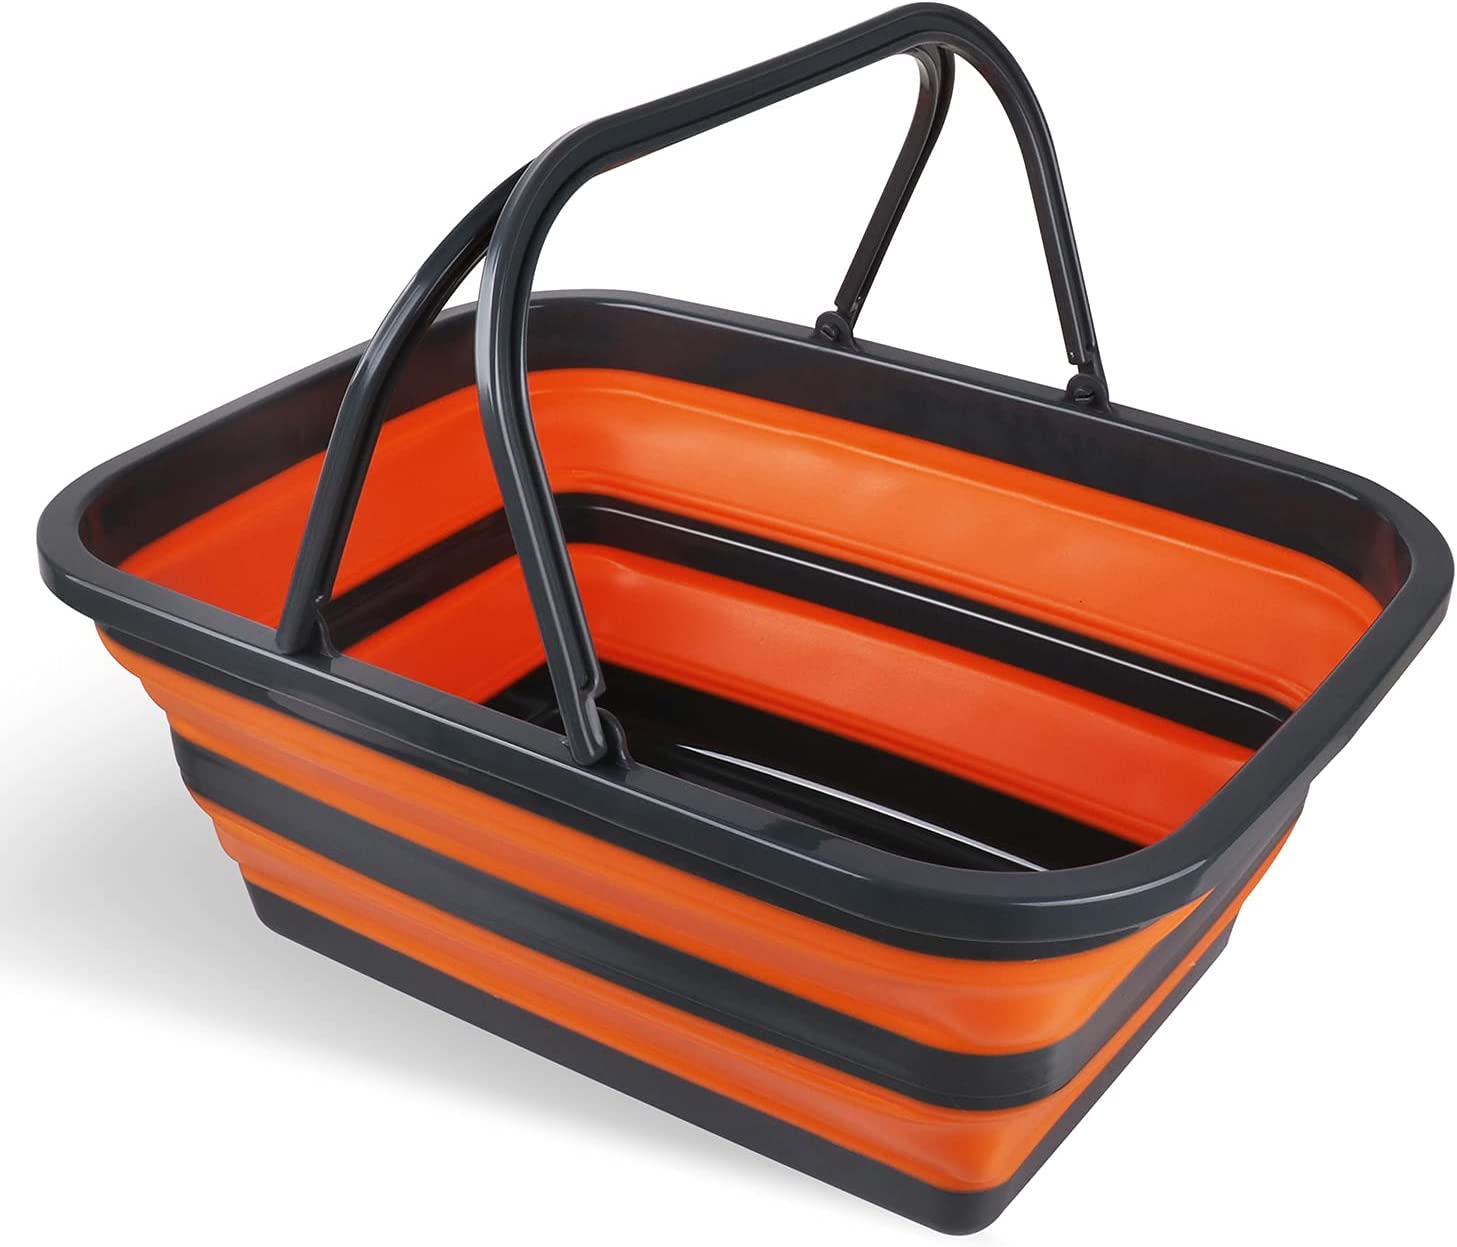 Versatile 16L Adjustable Collapsible Sink - Portable, Durable, Ideal for Camping, Showers, Storage, Dishwashing